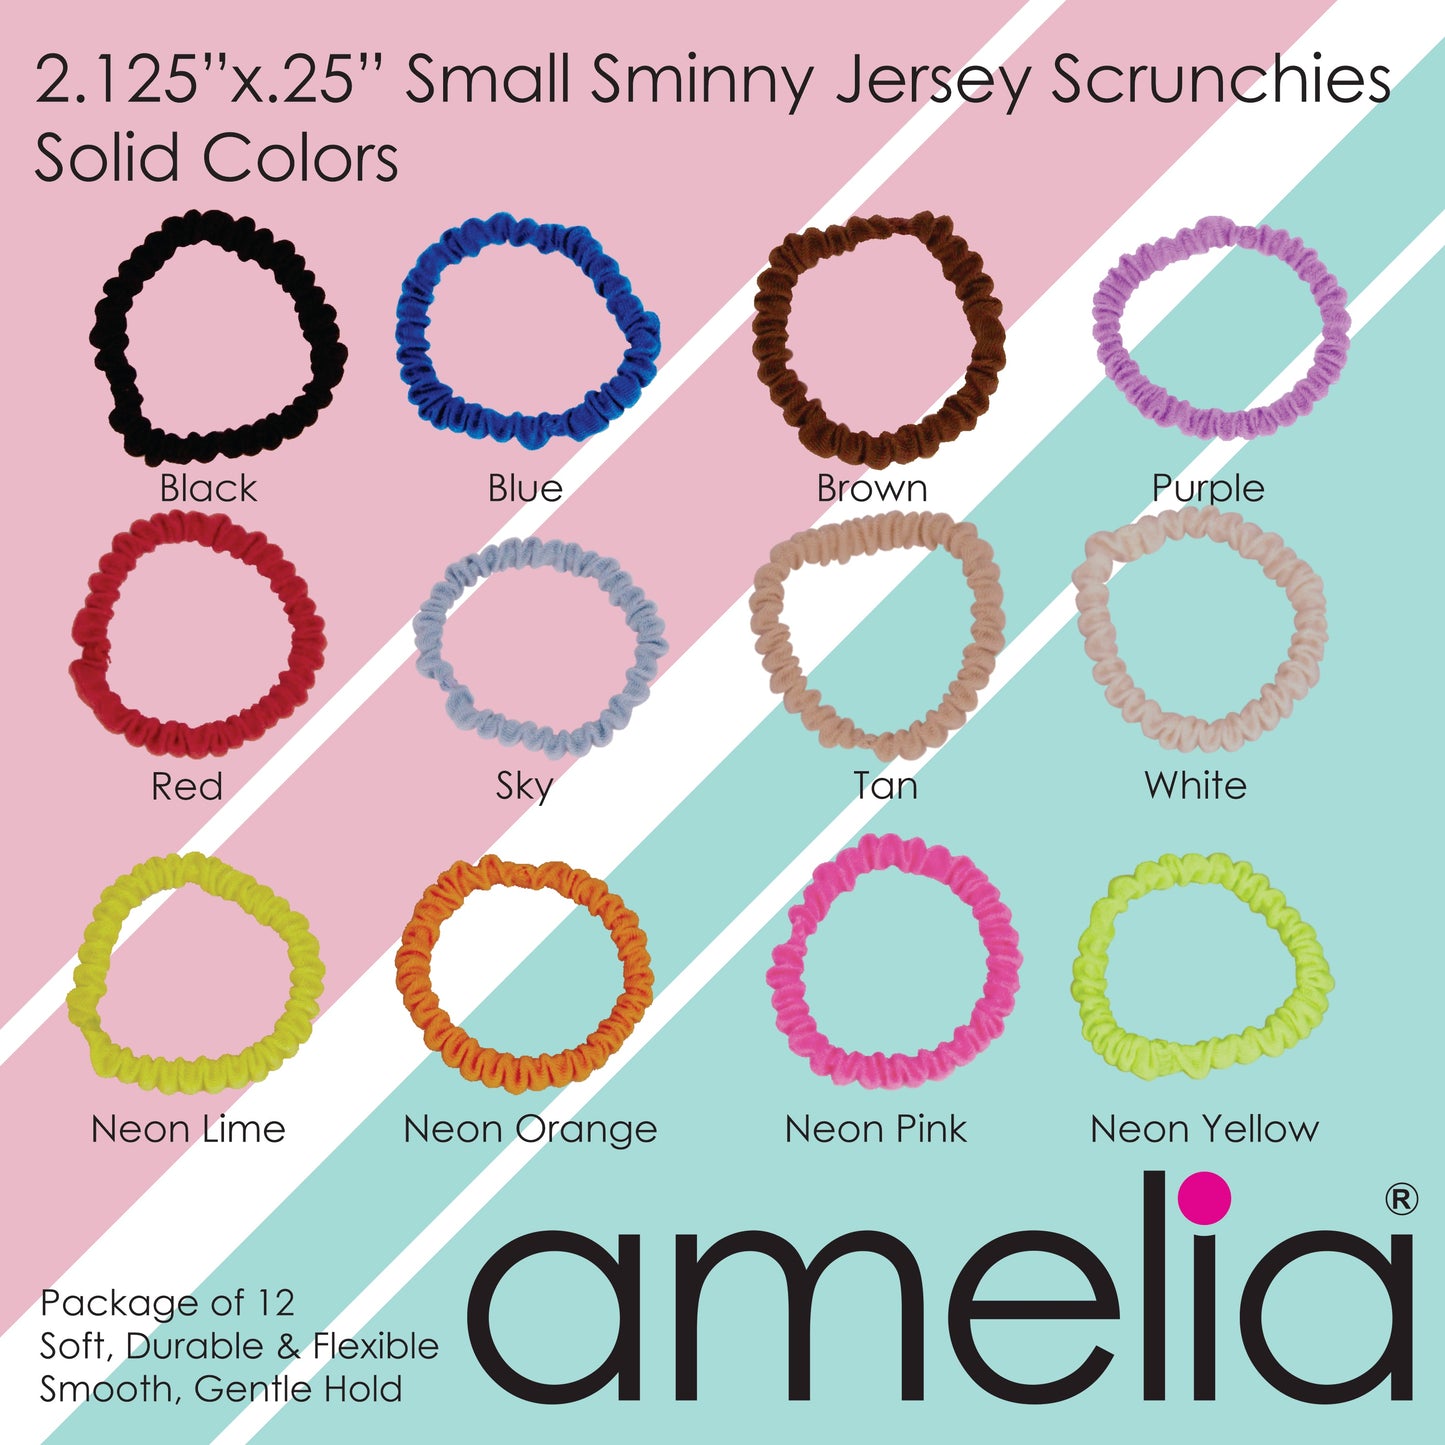 Amelia Beauty, Rainbow Stripe Skinny Jersey Scrunchies, 2.125in Diameter, Gentle on Hair, Strong Hold, No Snag, No Dents or Creases. 12 Pack